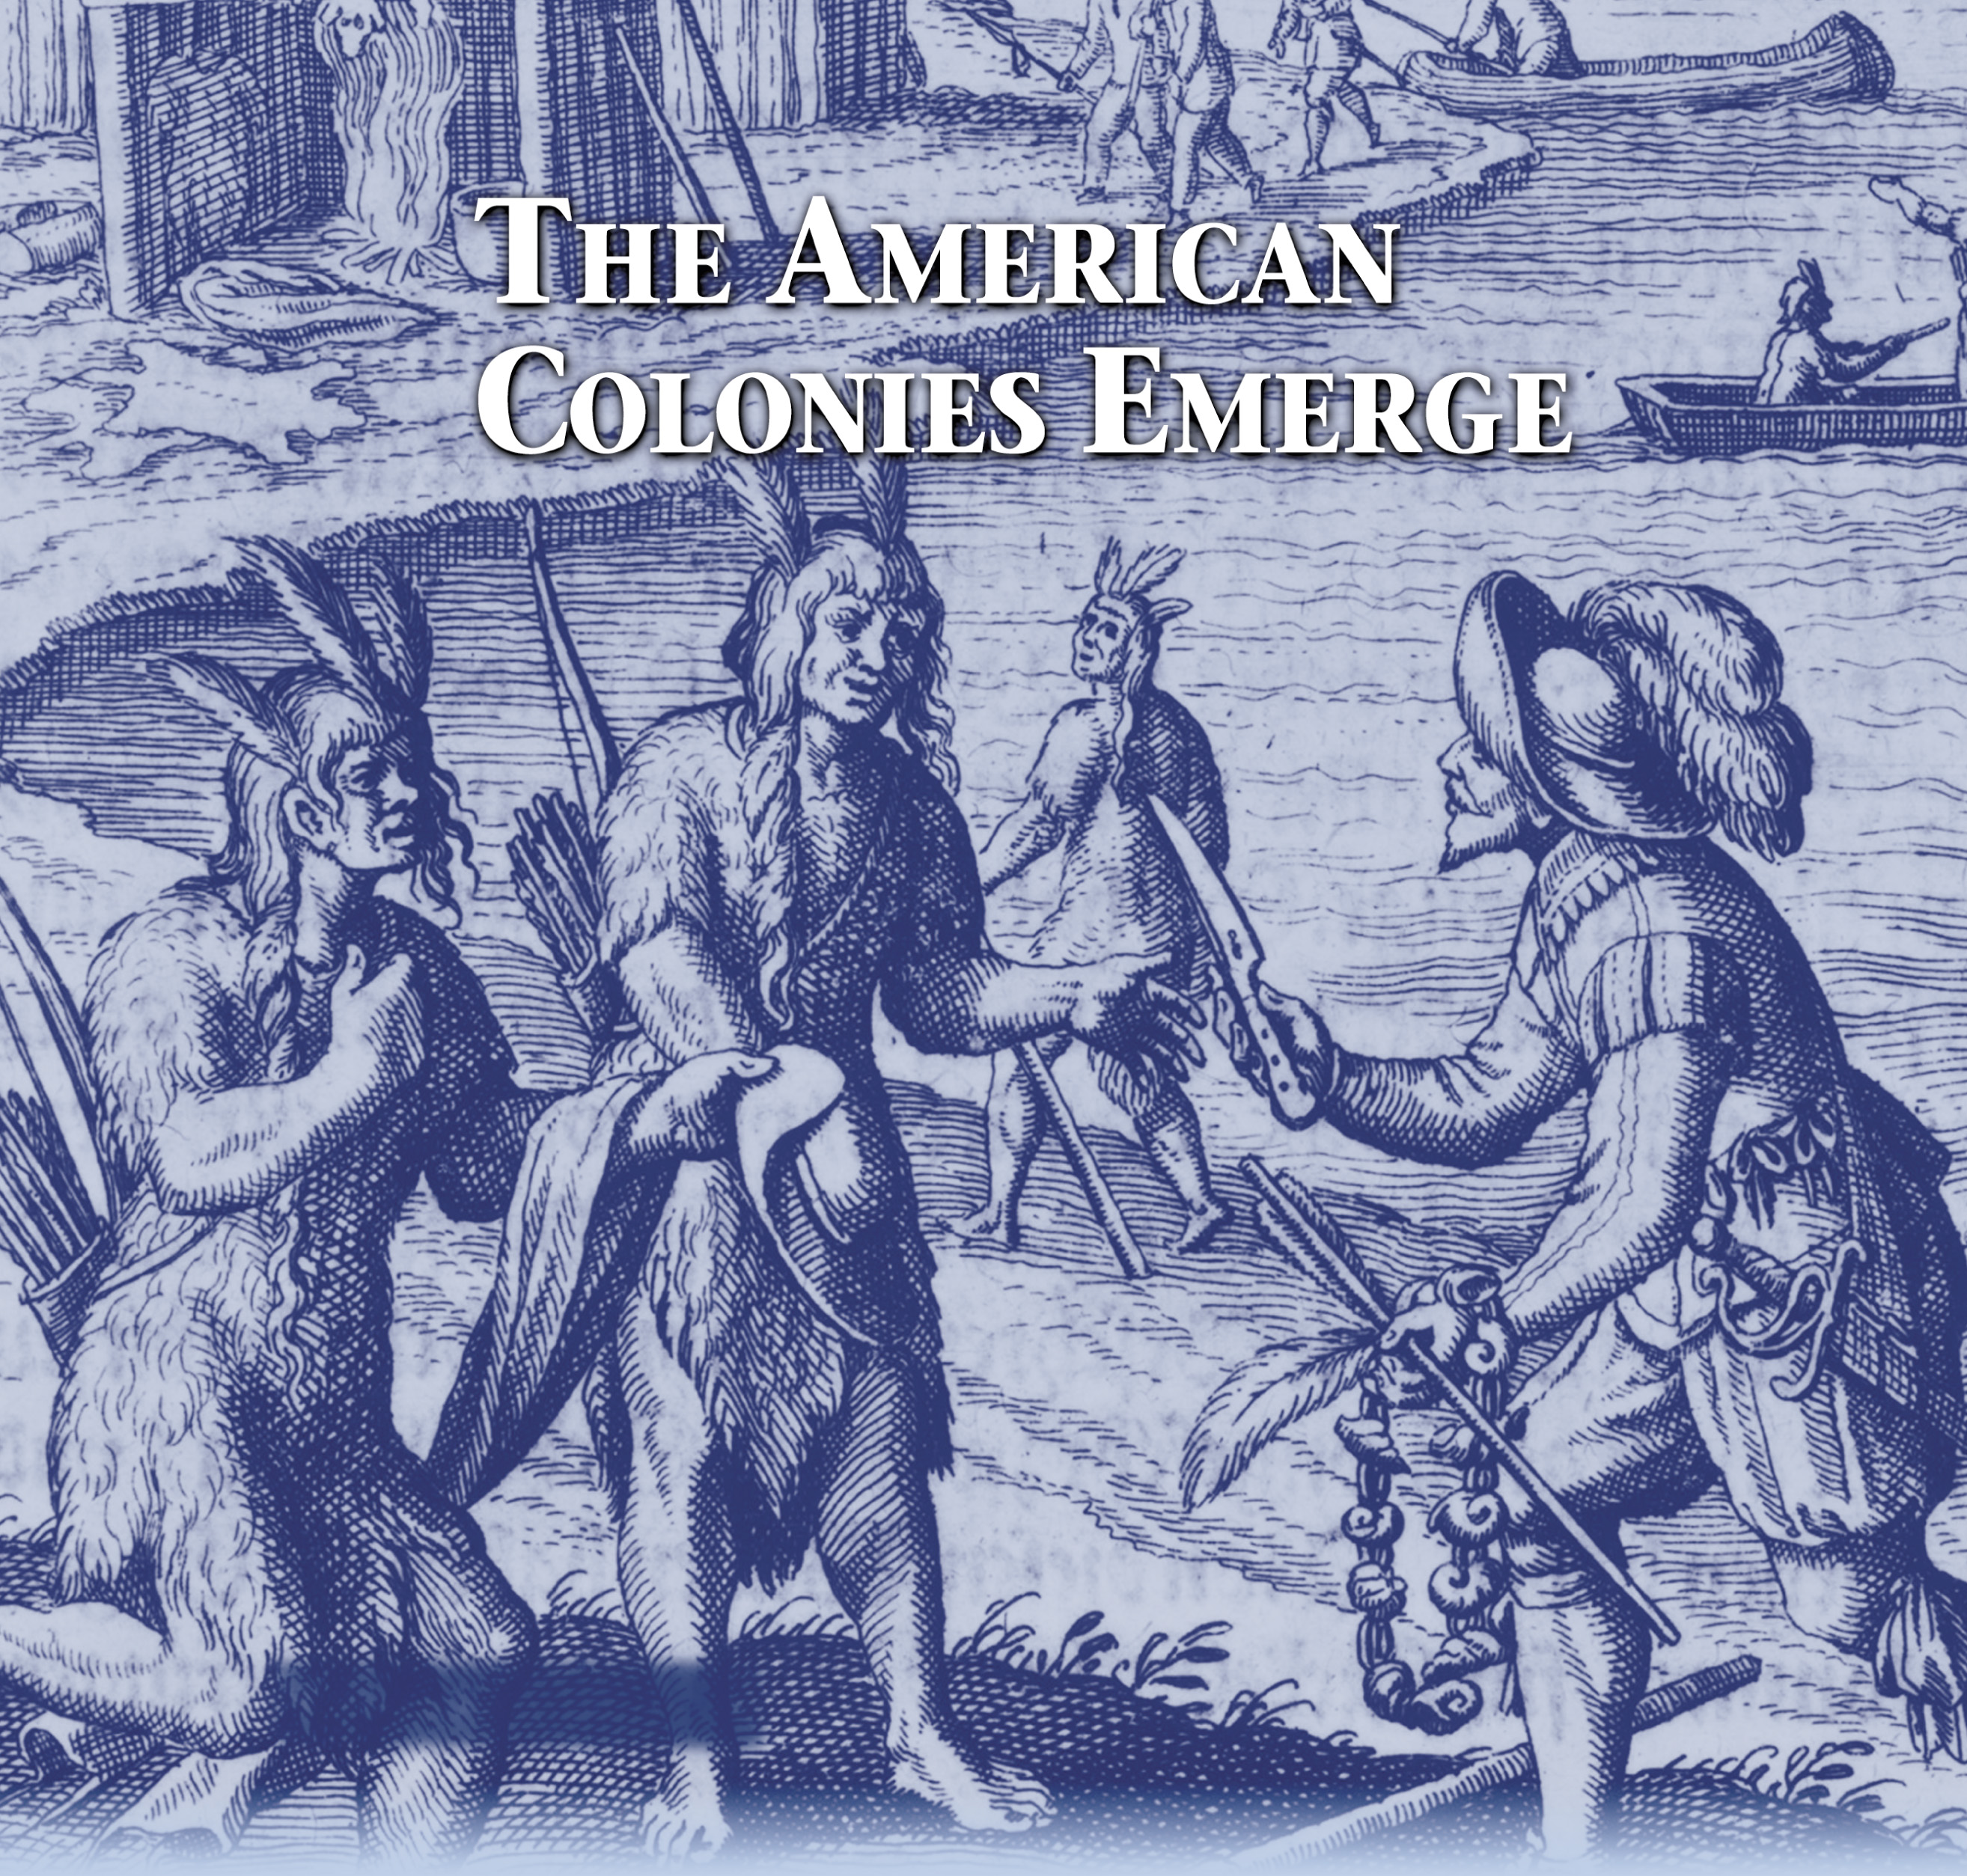 Illustration: explorers trade with Native Americans. A title: The American Colonies Emerge.